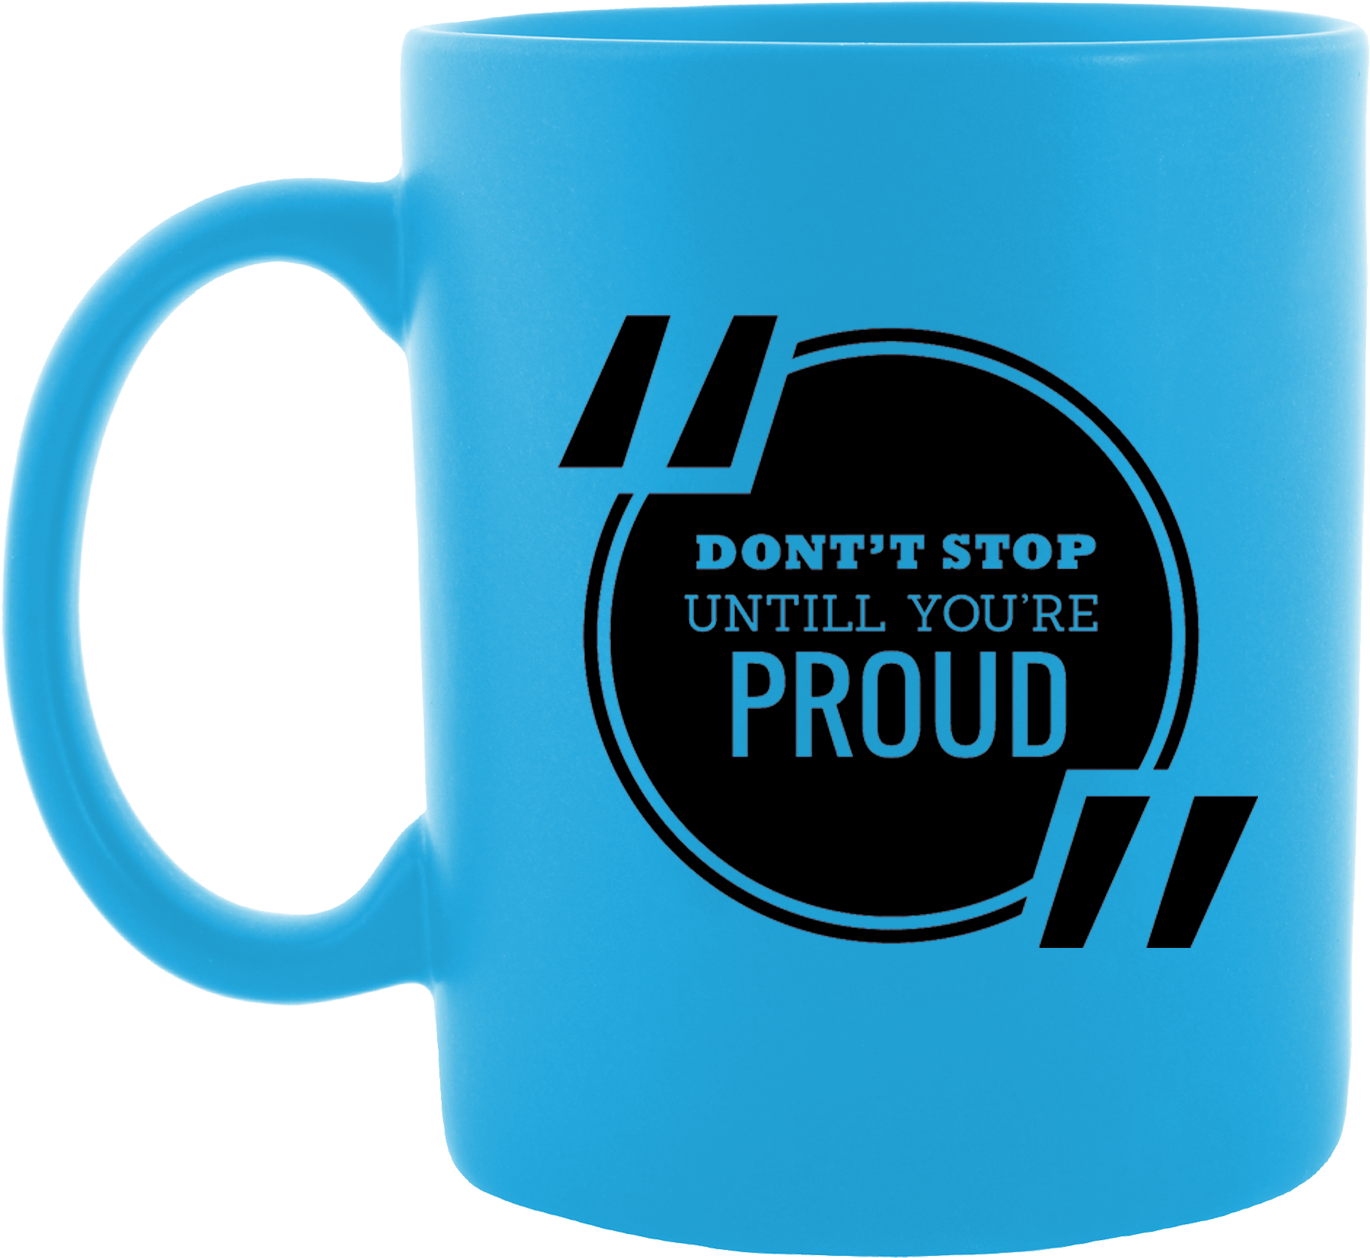 Dont Stop Untile You're Proud Coffee Mug - Quotation (1500x1500)